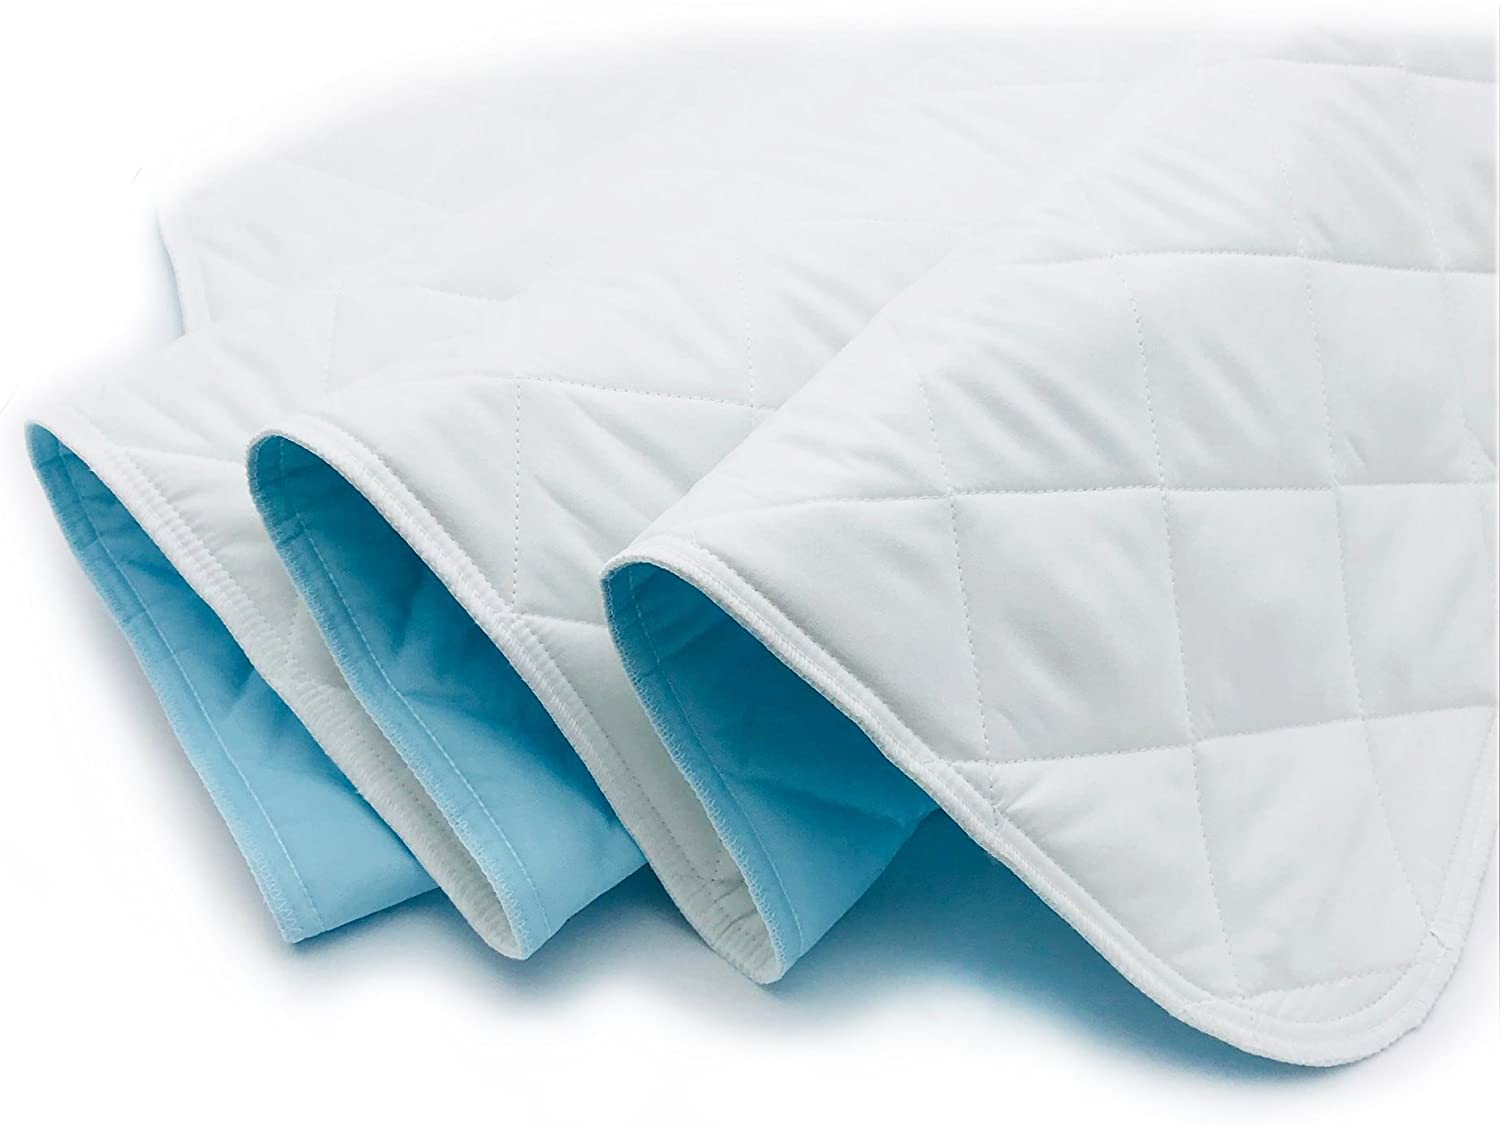 KANECH Washable Bed Incontinence Pads